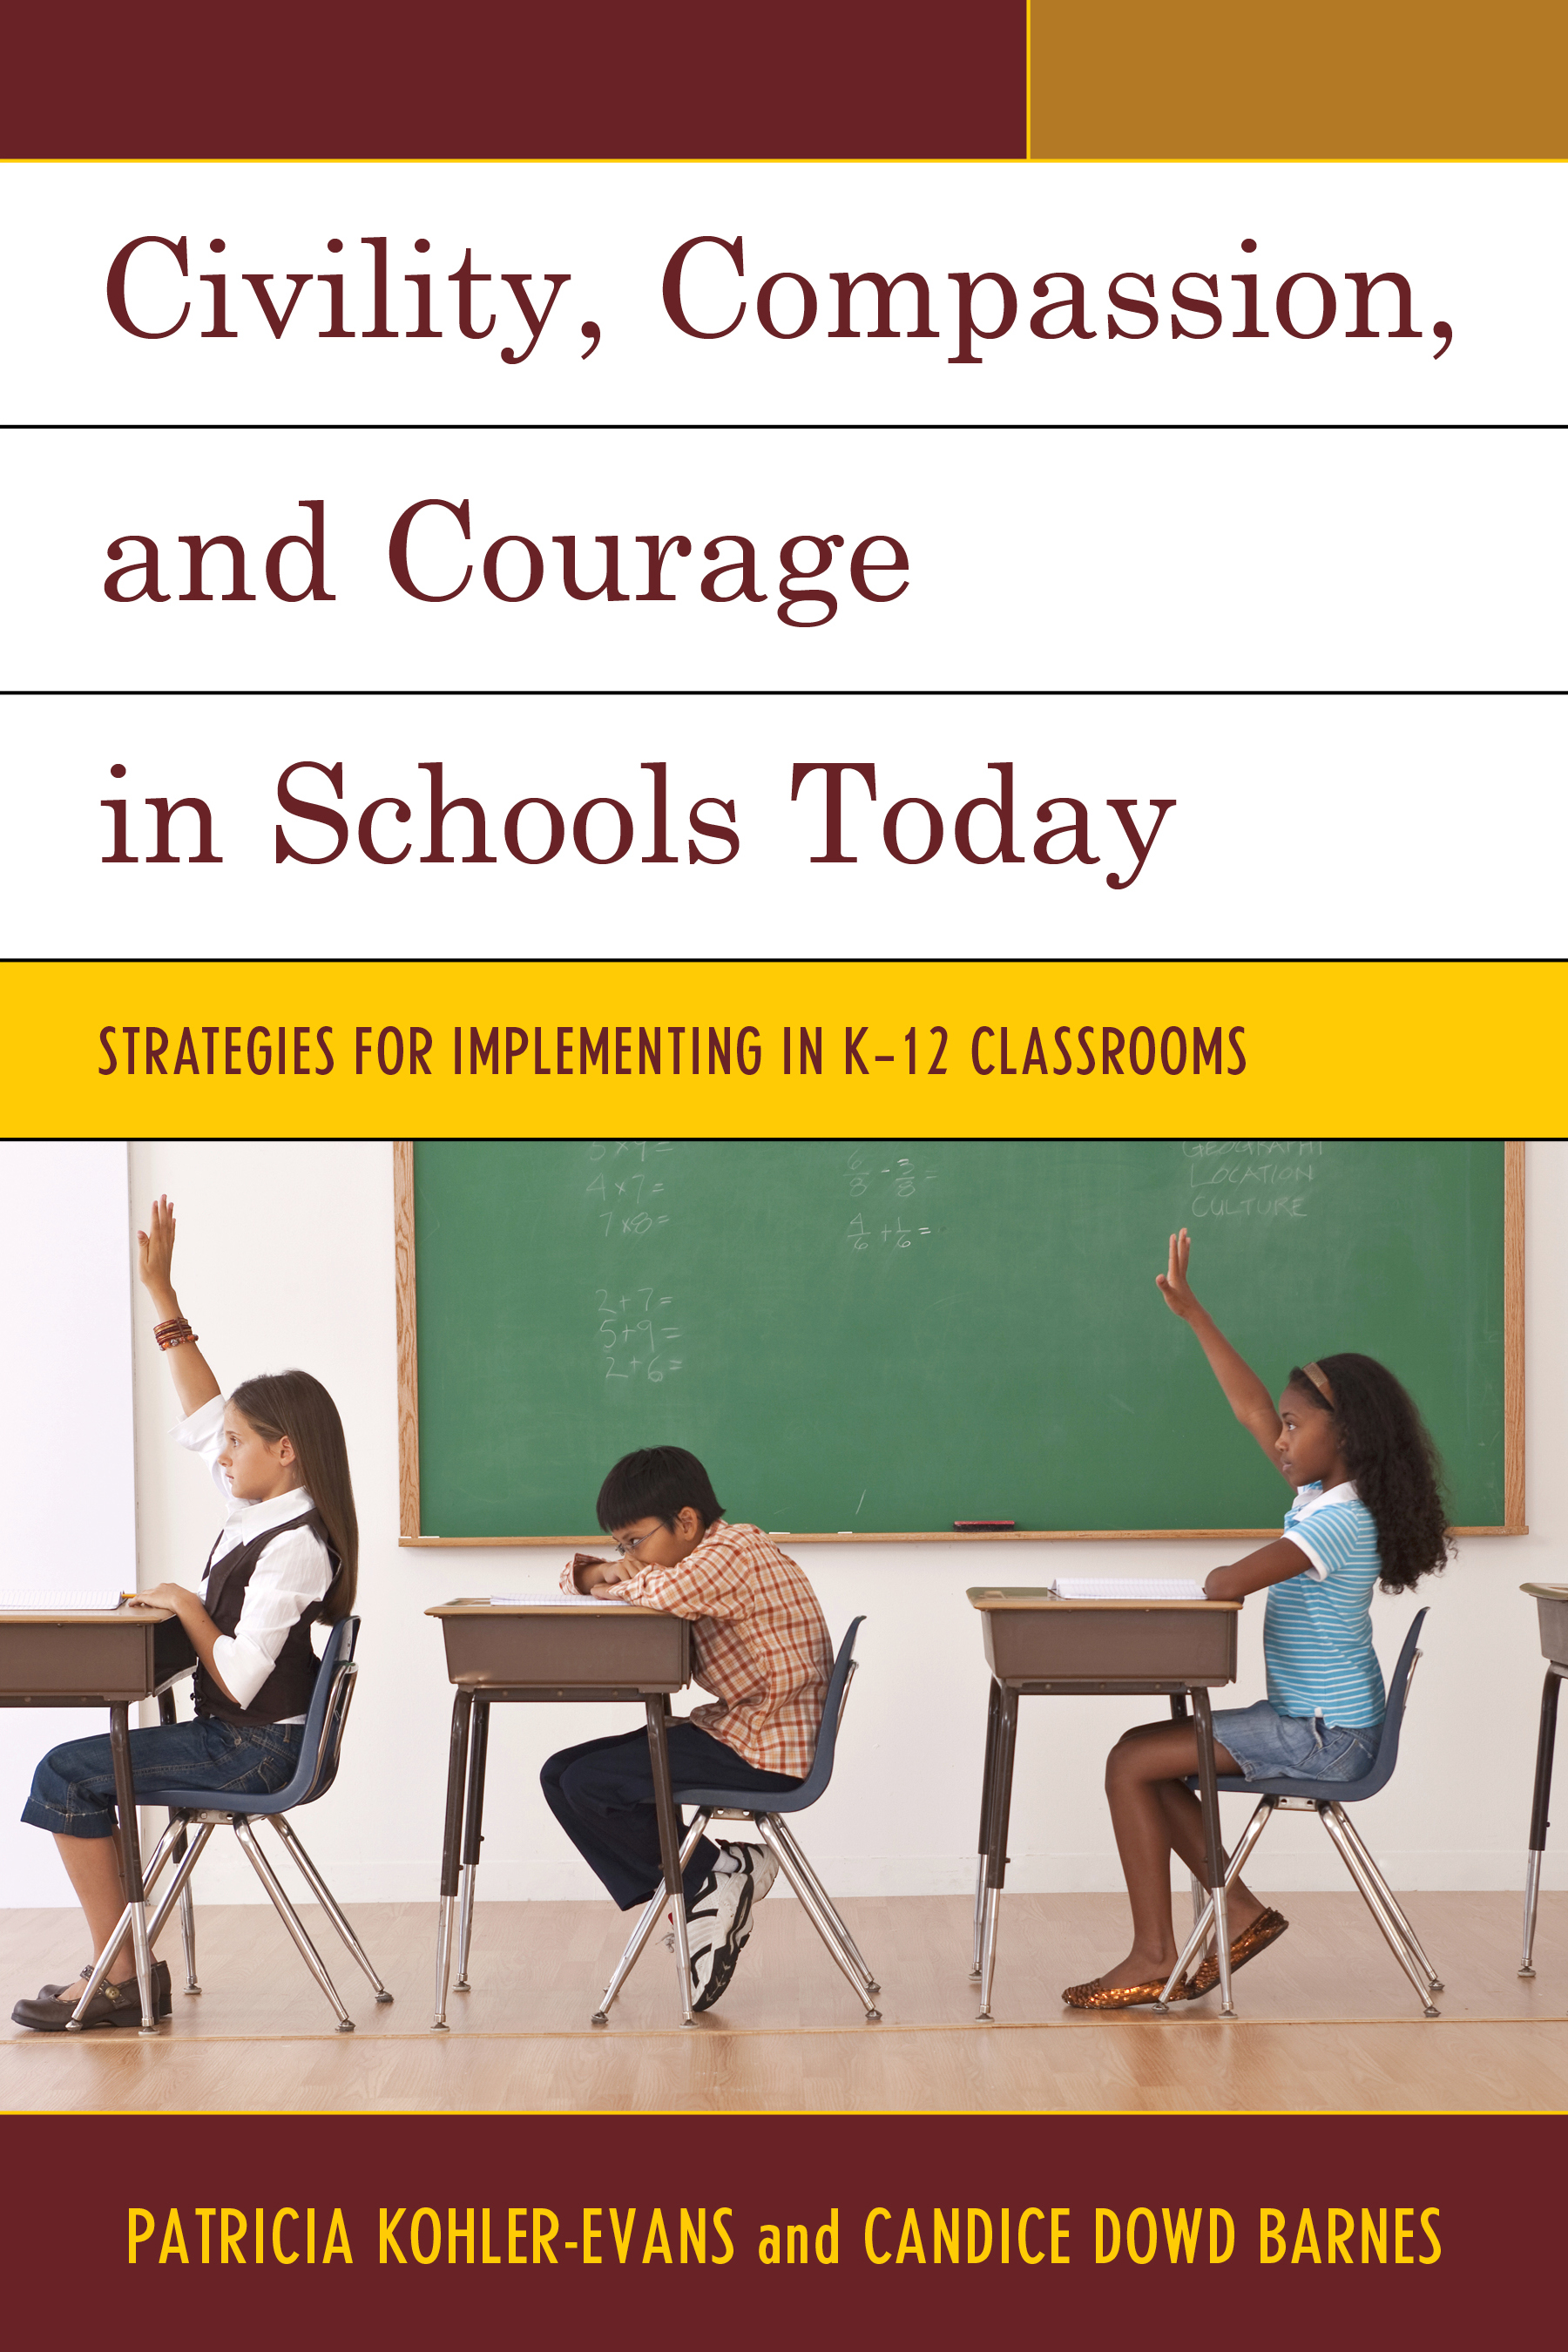 Civility, Compassion, and Courage in Schools Today: Strategies for Implementing in K-12 Classrooms